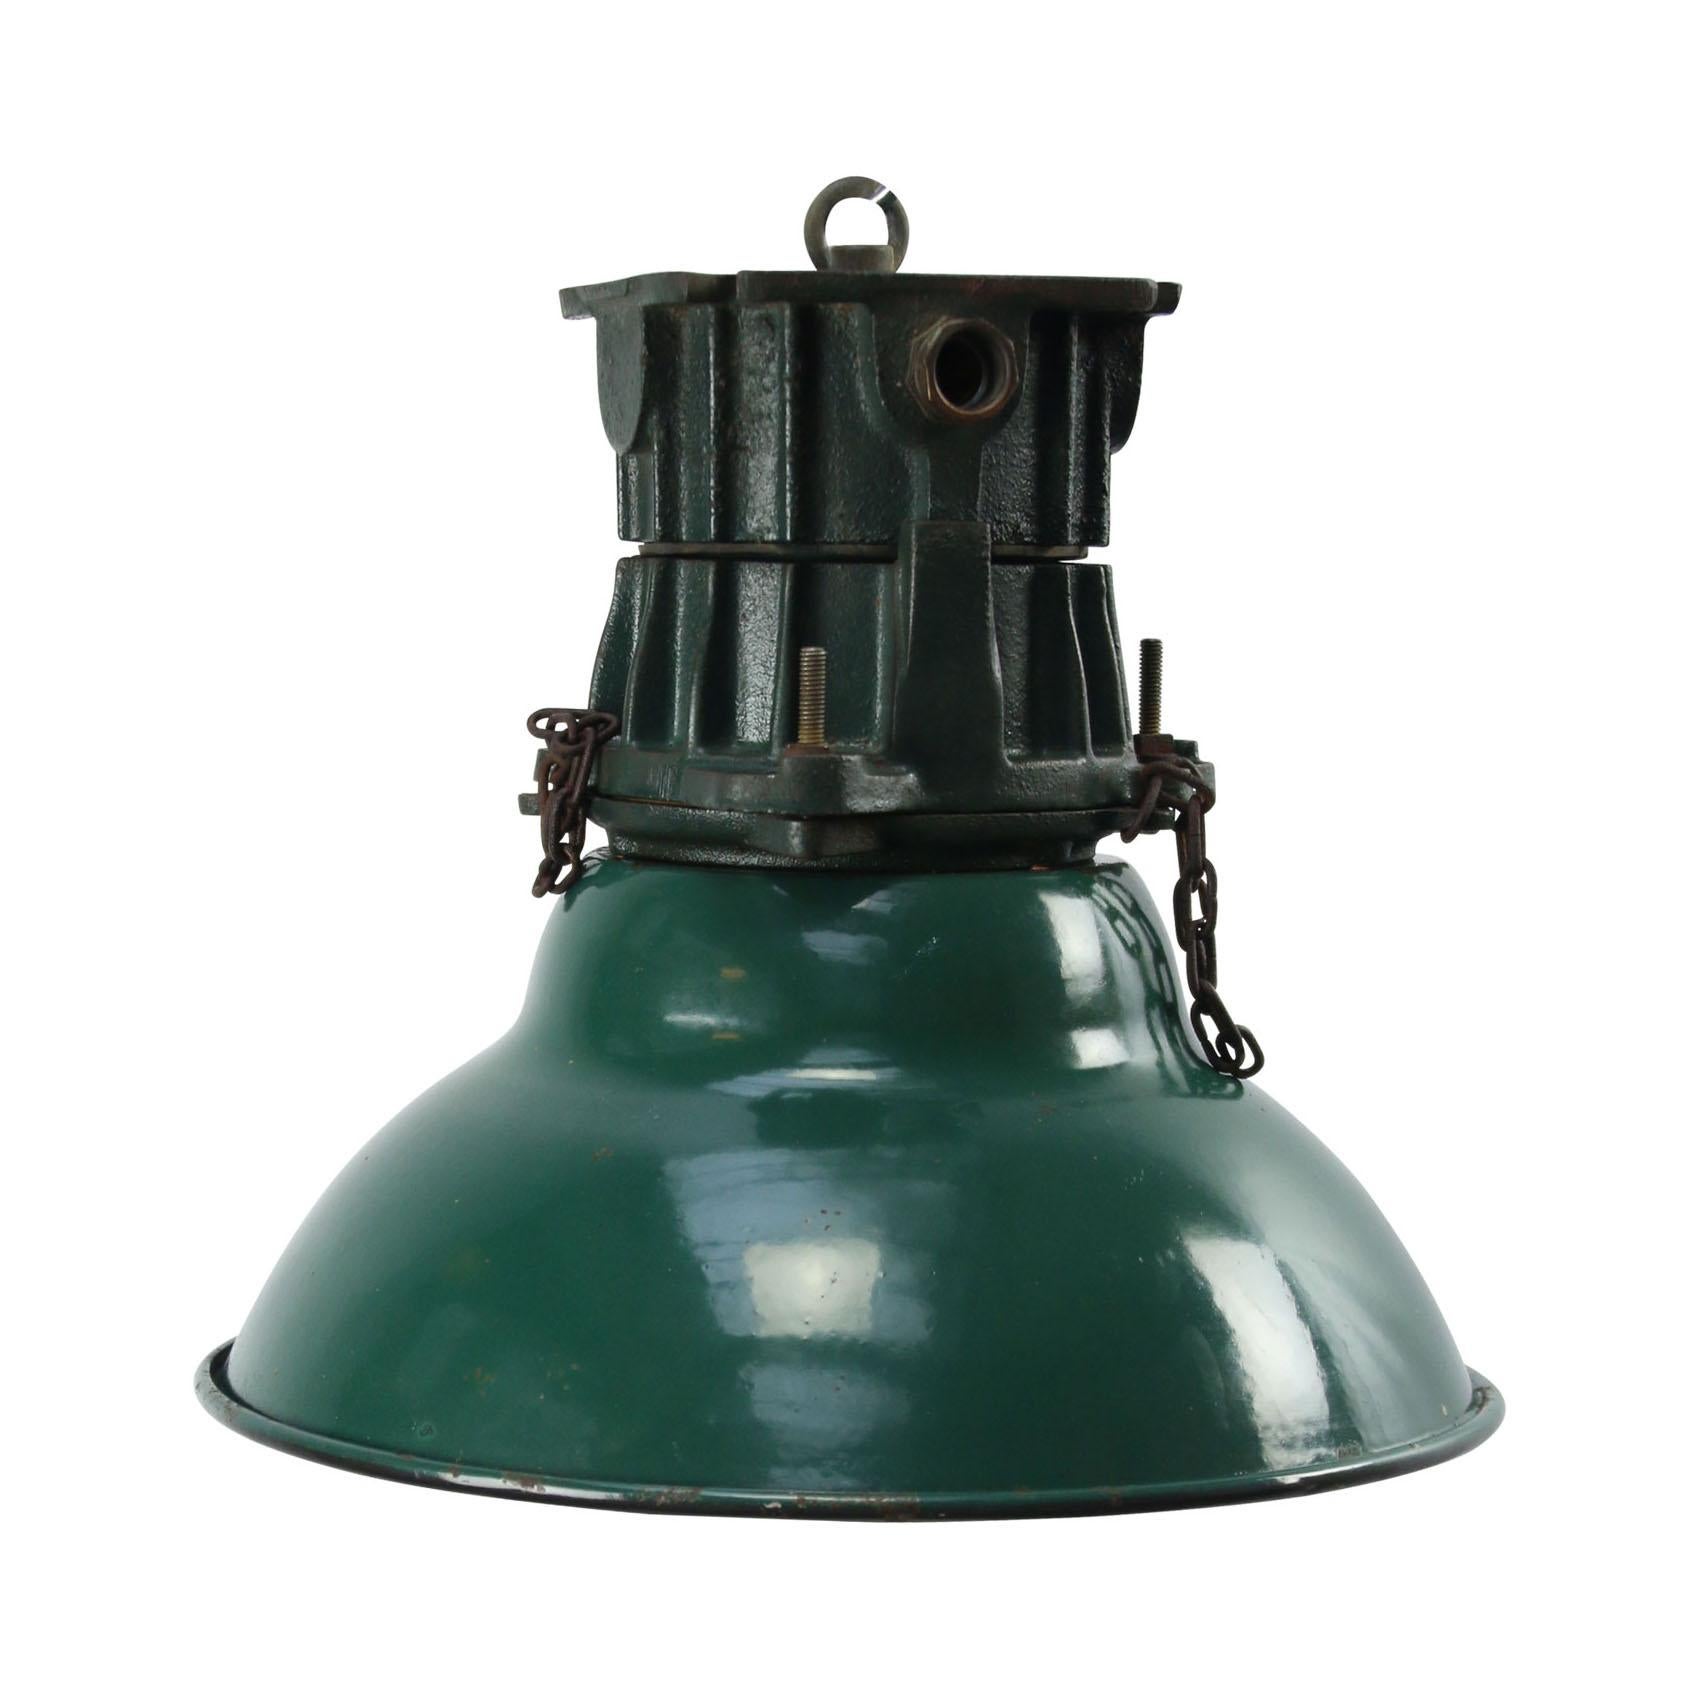 French factory pendant. Dark green enamel white interior.
Green cast iron top. Clear glass

Weight: 2.90 kg / 6.4 lb

All lamps have been made suitable by international standards for incandescent light bulbs, energy-efficient and LED bulbs.